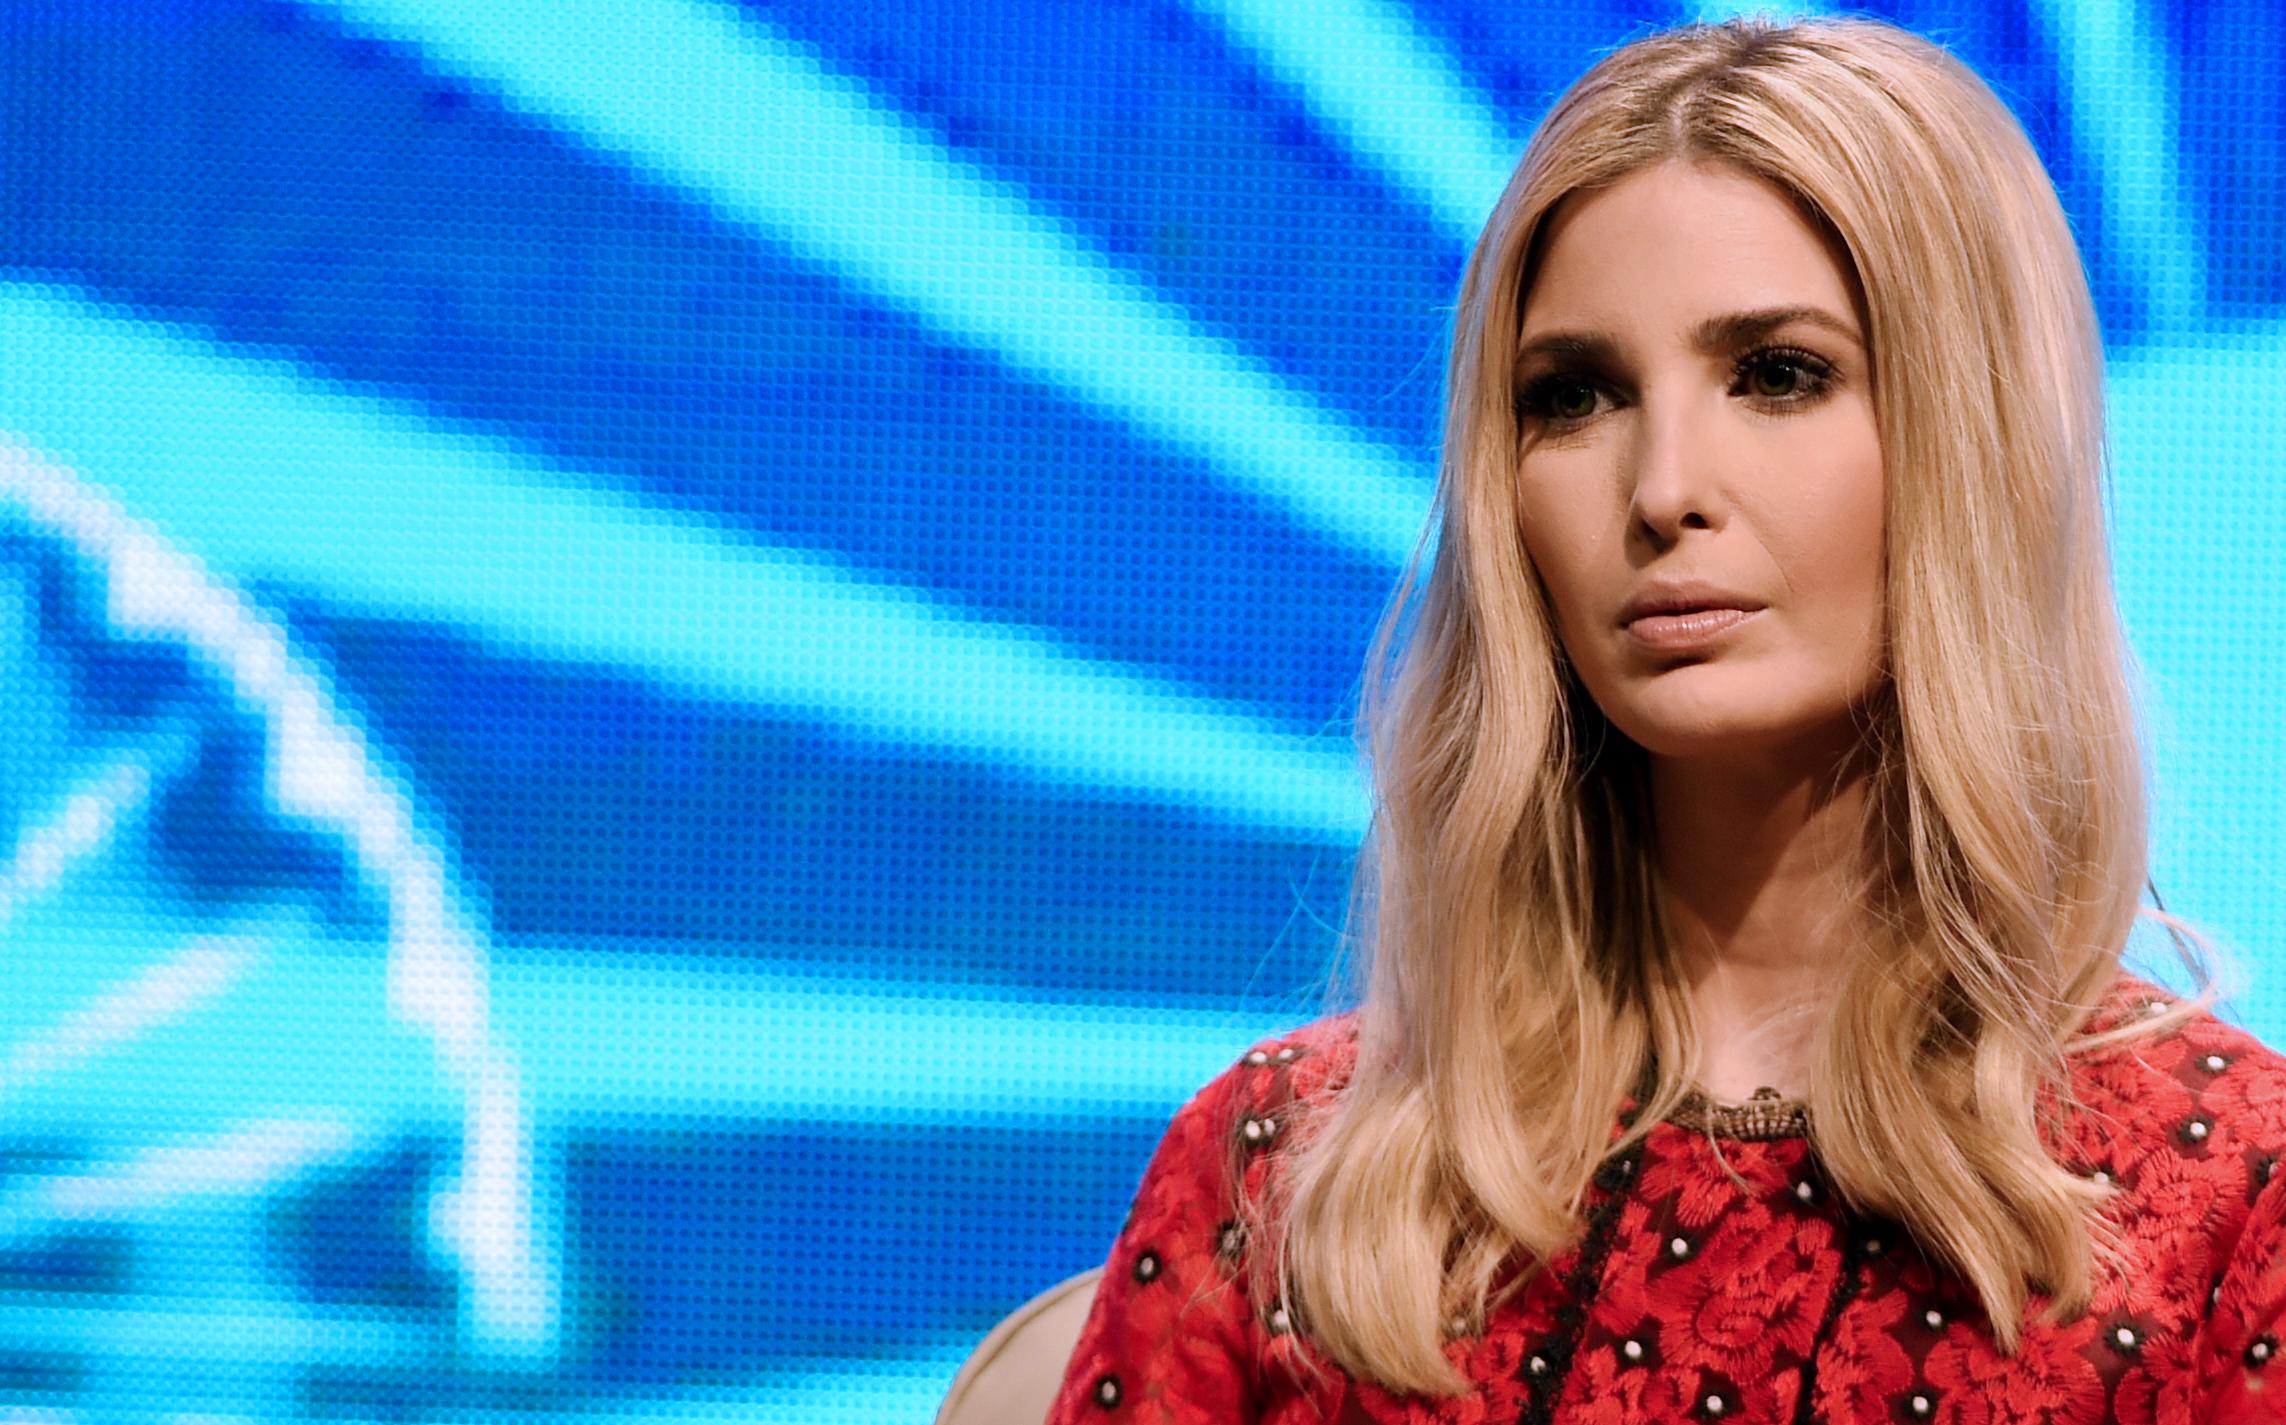 Advisor to the US President Ivanka Trump looks on during a panel discussion at the Global Entrepreneurship Summit